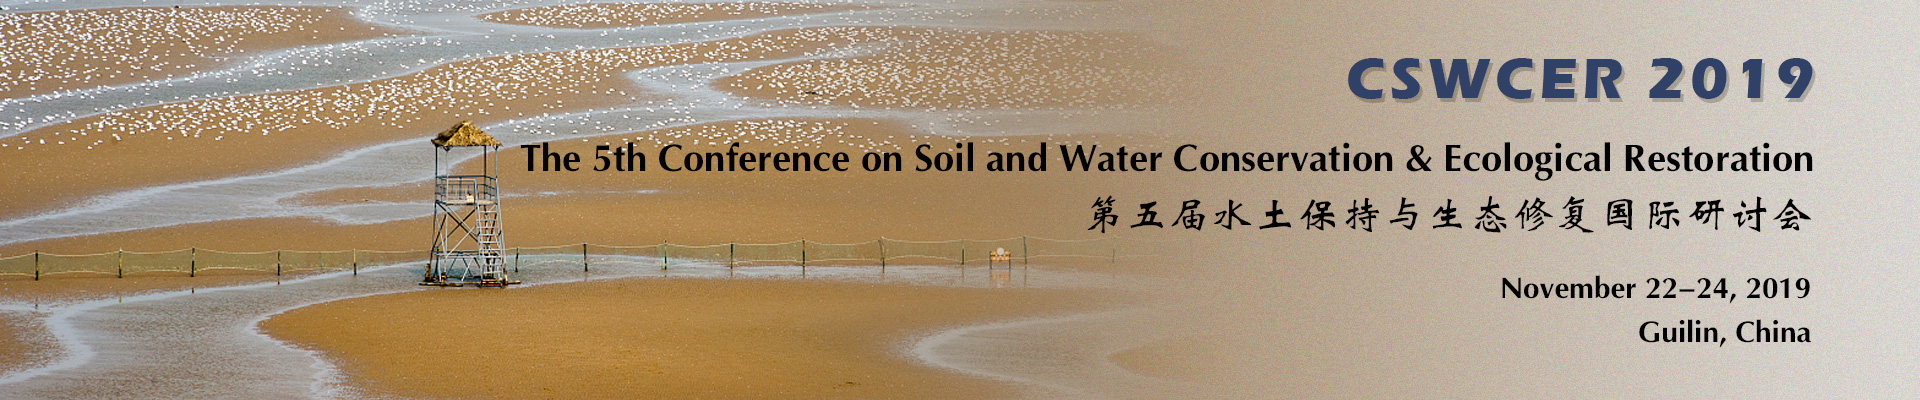 The 5th Conference on Soil and Water Conservation & Ecological Restoration (CSWCER 2019), Guilin, Guangxi, China